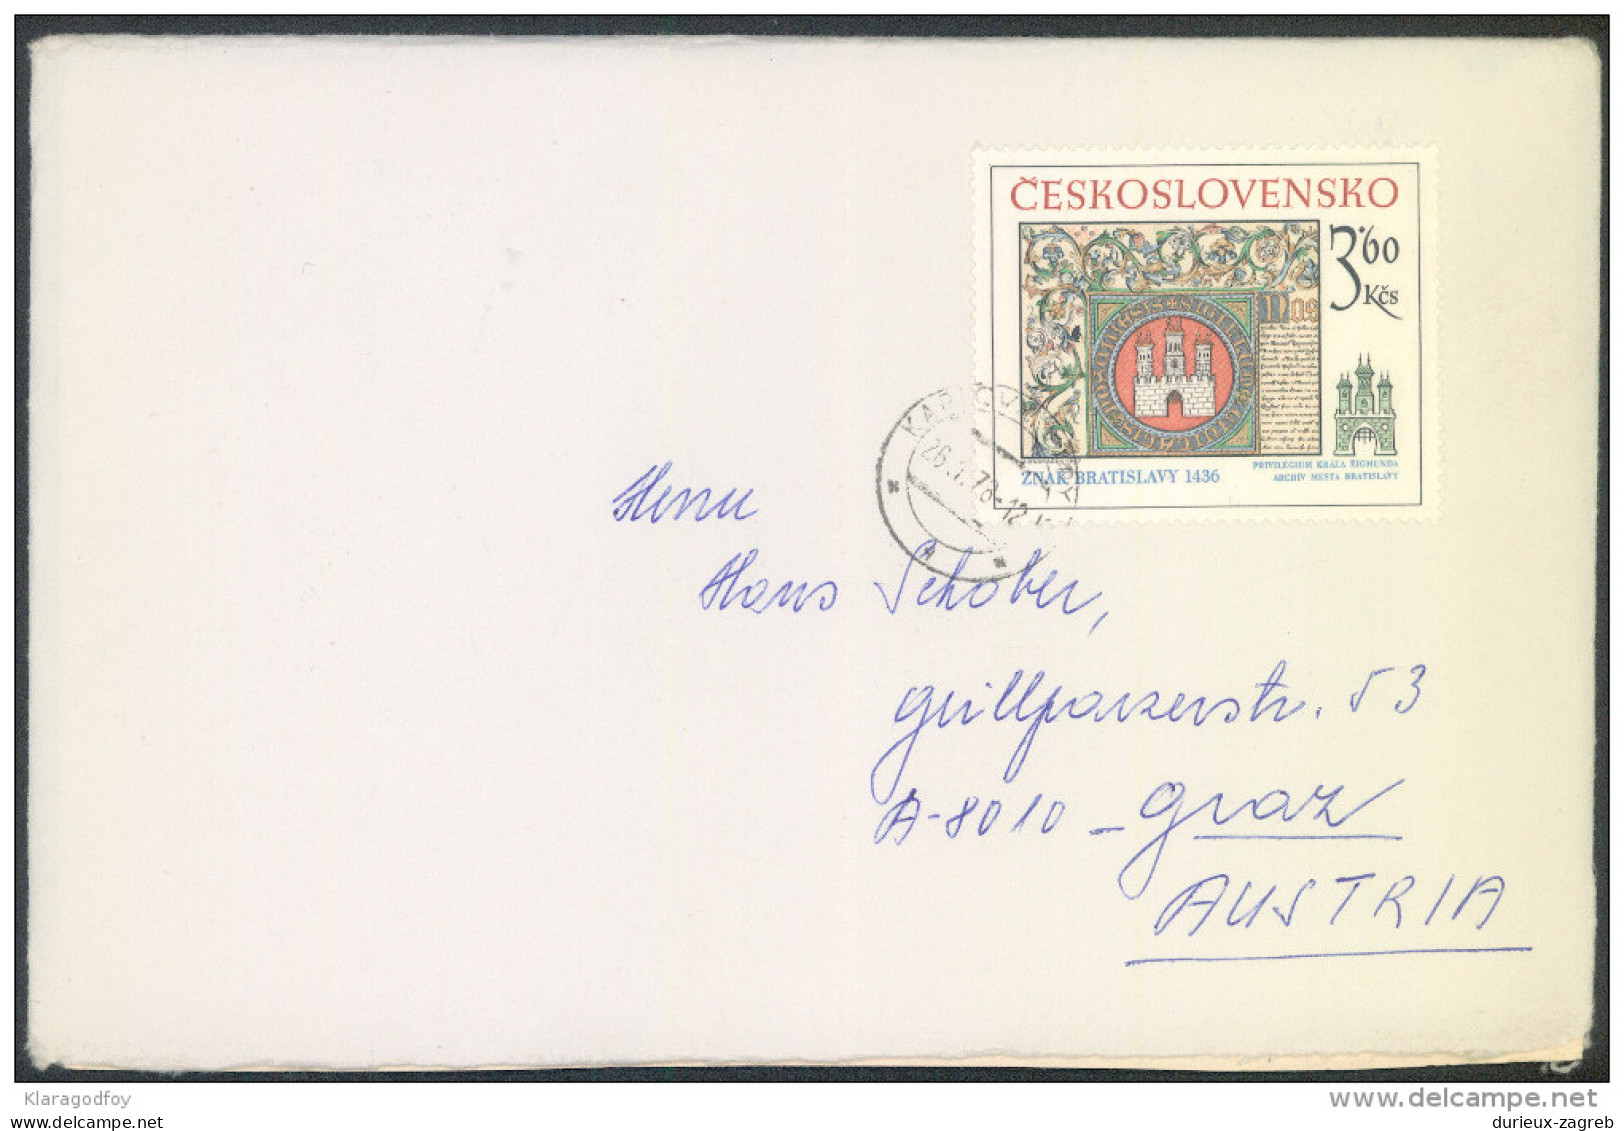 Czechoslovakia Letter Cover Travelled 1978 Bb161028 - Briefe U. Dokumente